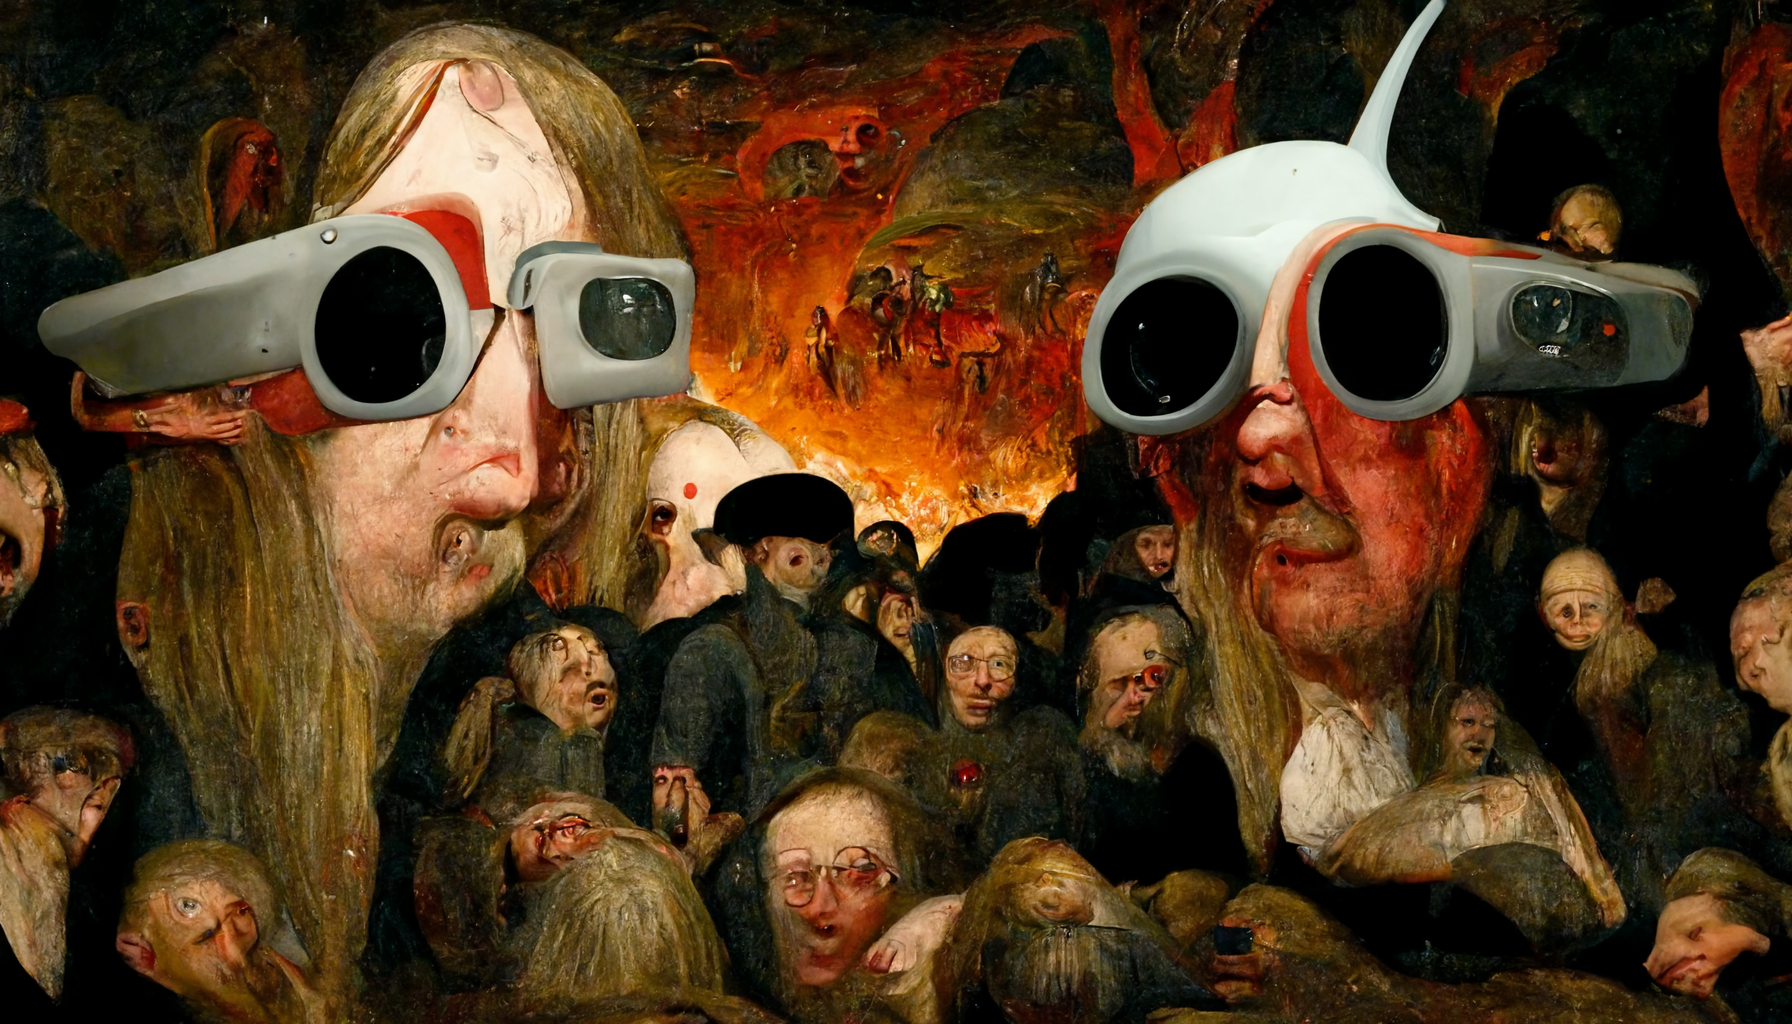 Wearing VR glasses in hell